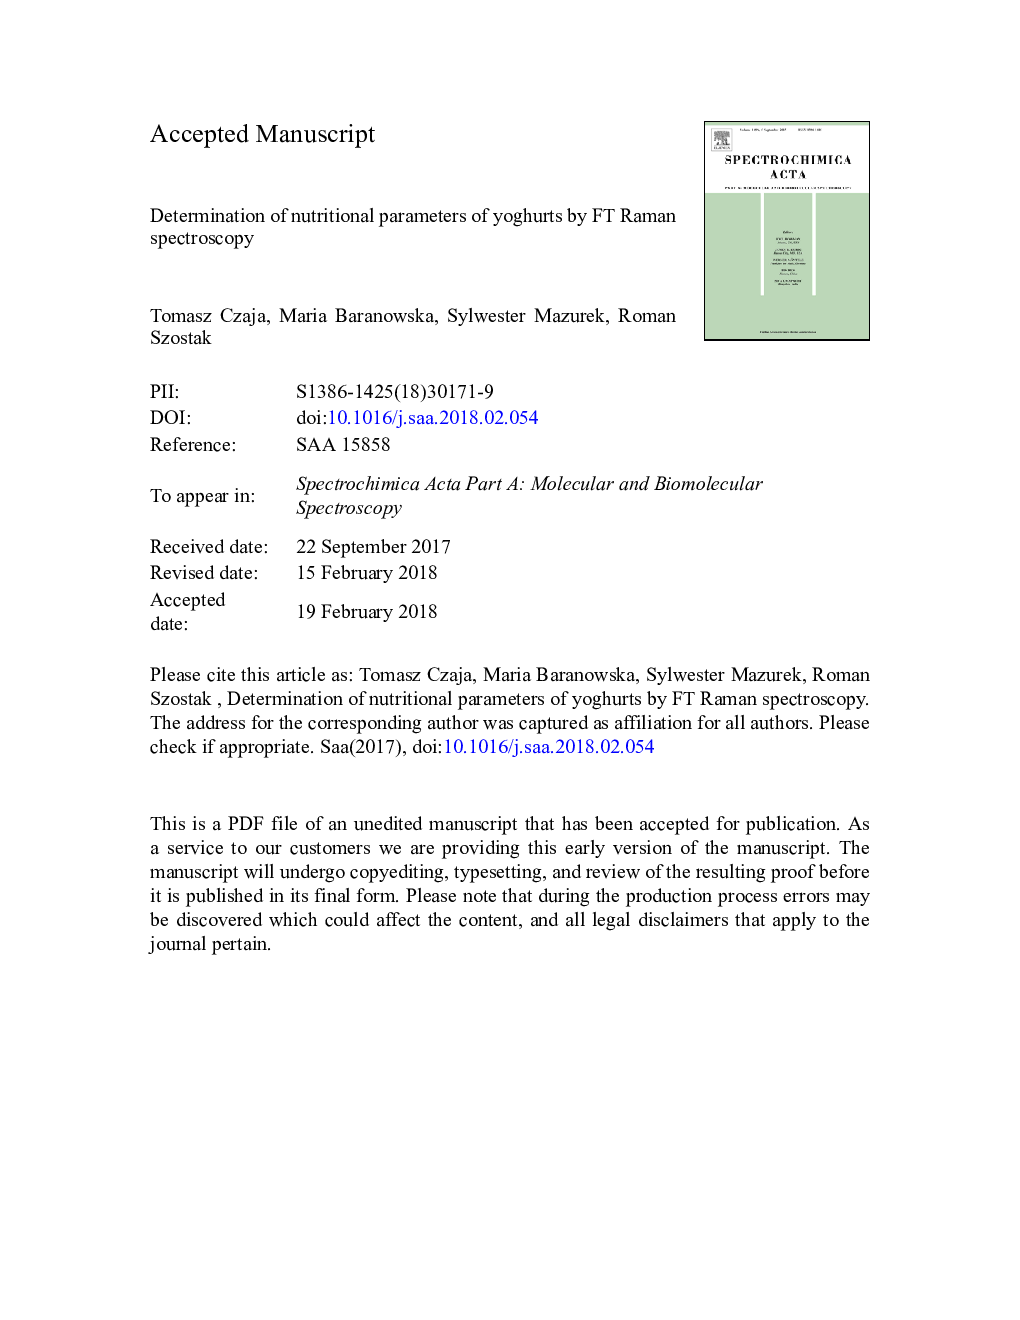 Determination of nutritional parameters of yoghurts by FT Raman spectroscopy